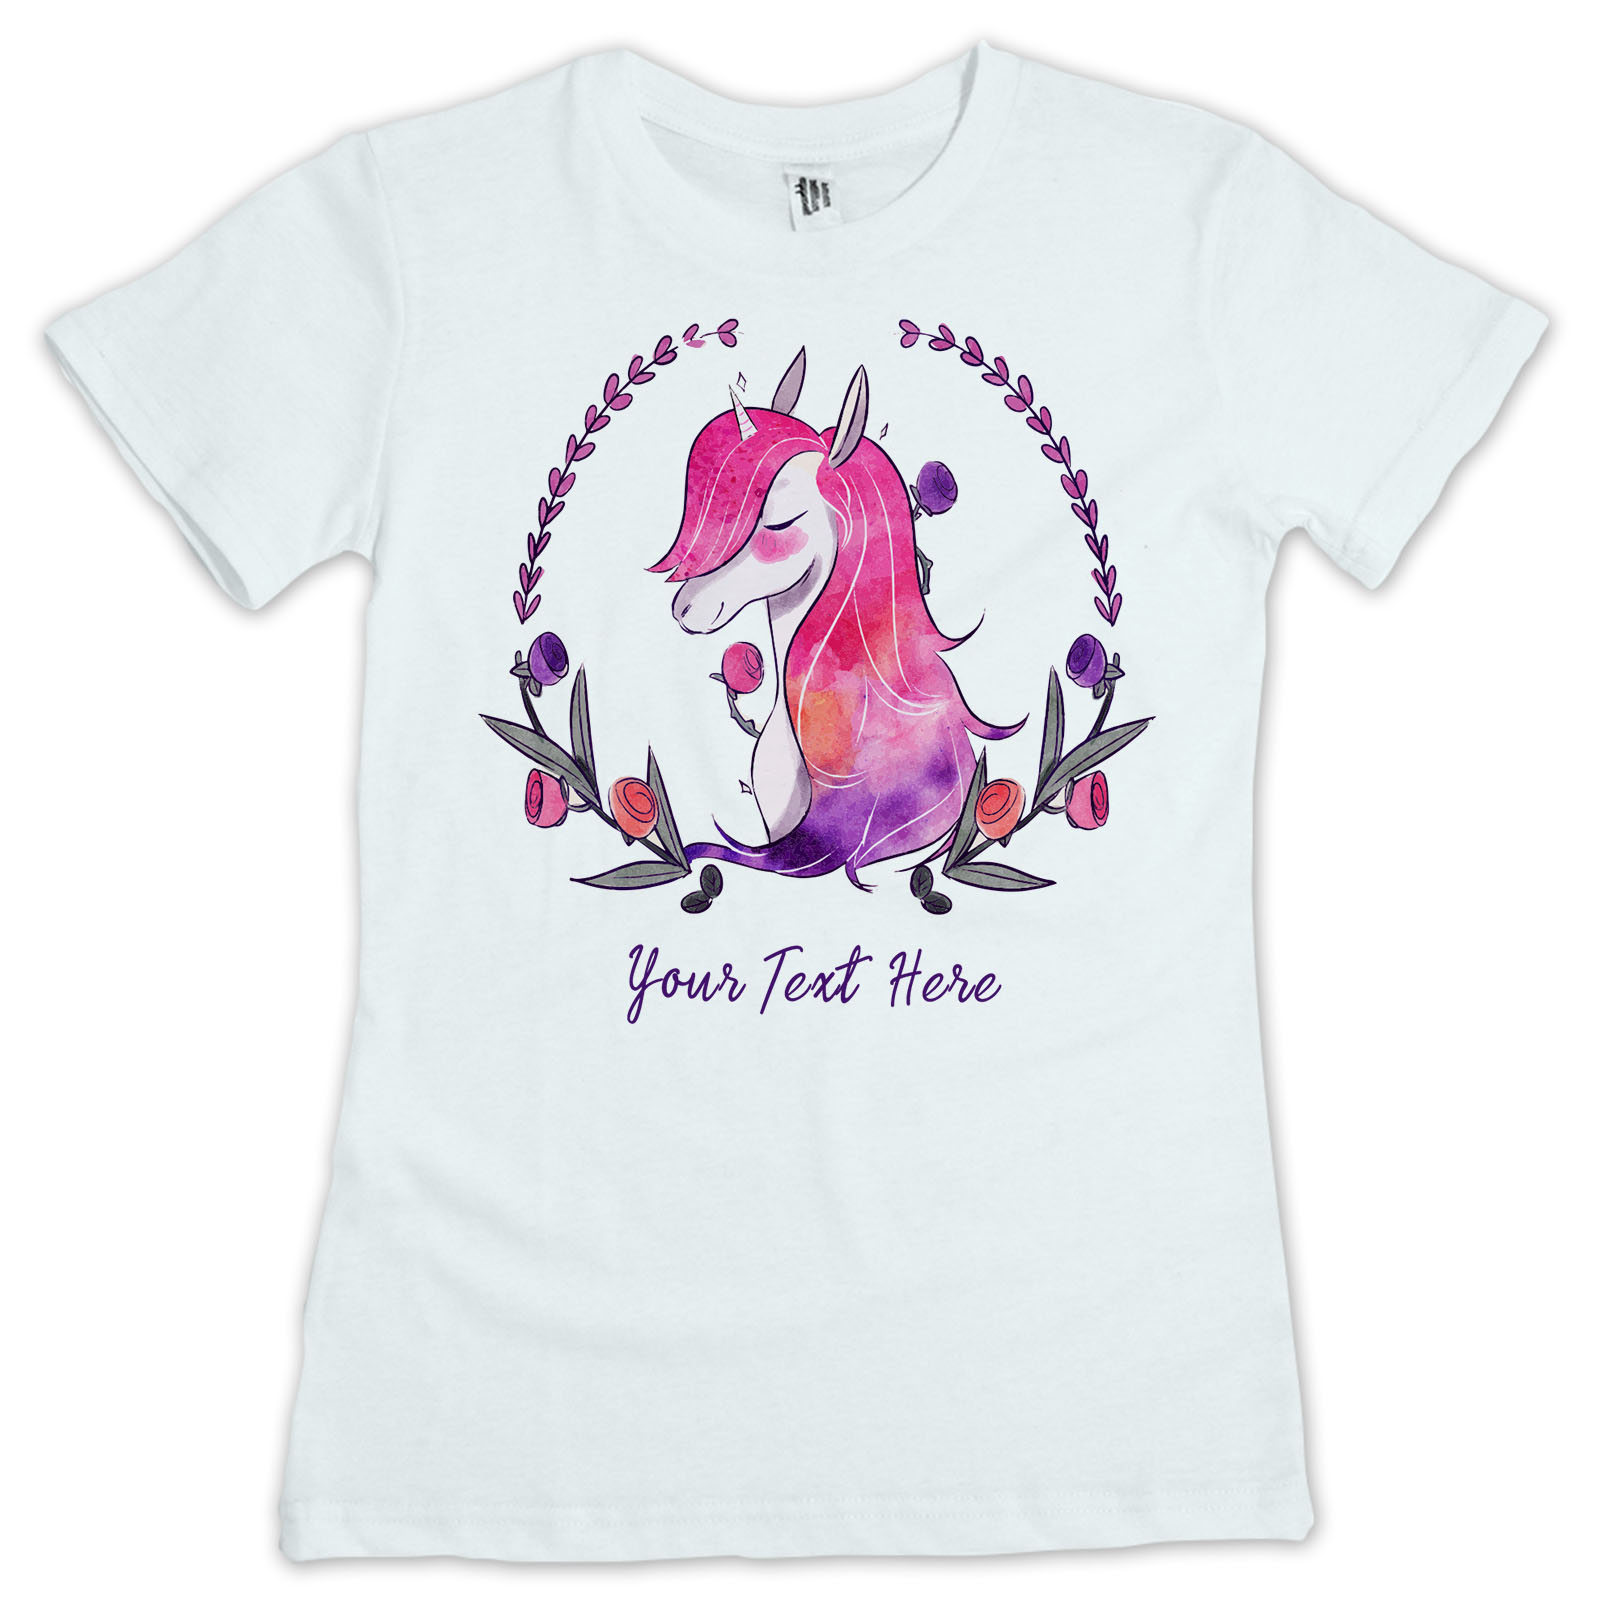 Front Name Back Spotty Unicorn Ladies Children In Need New Personalised Tshirt